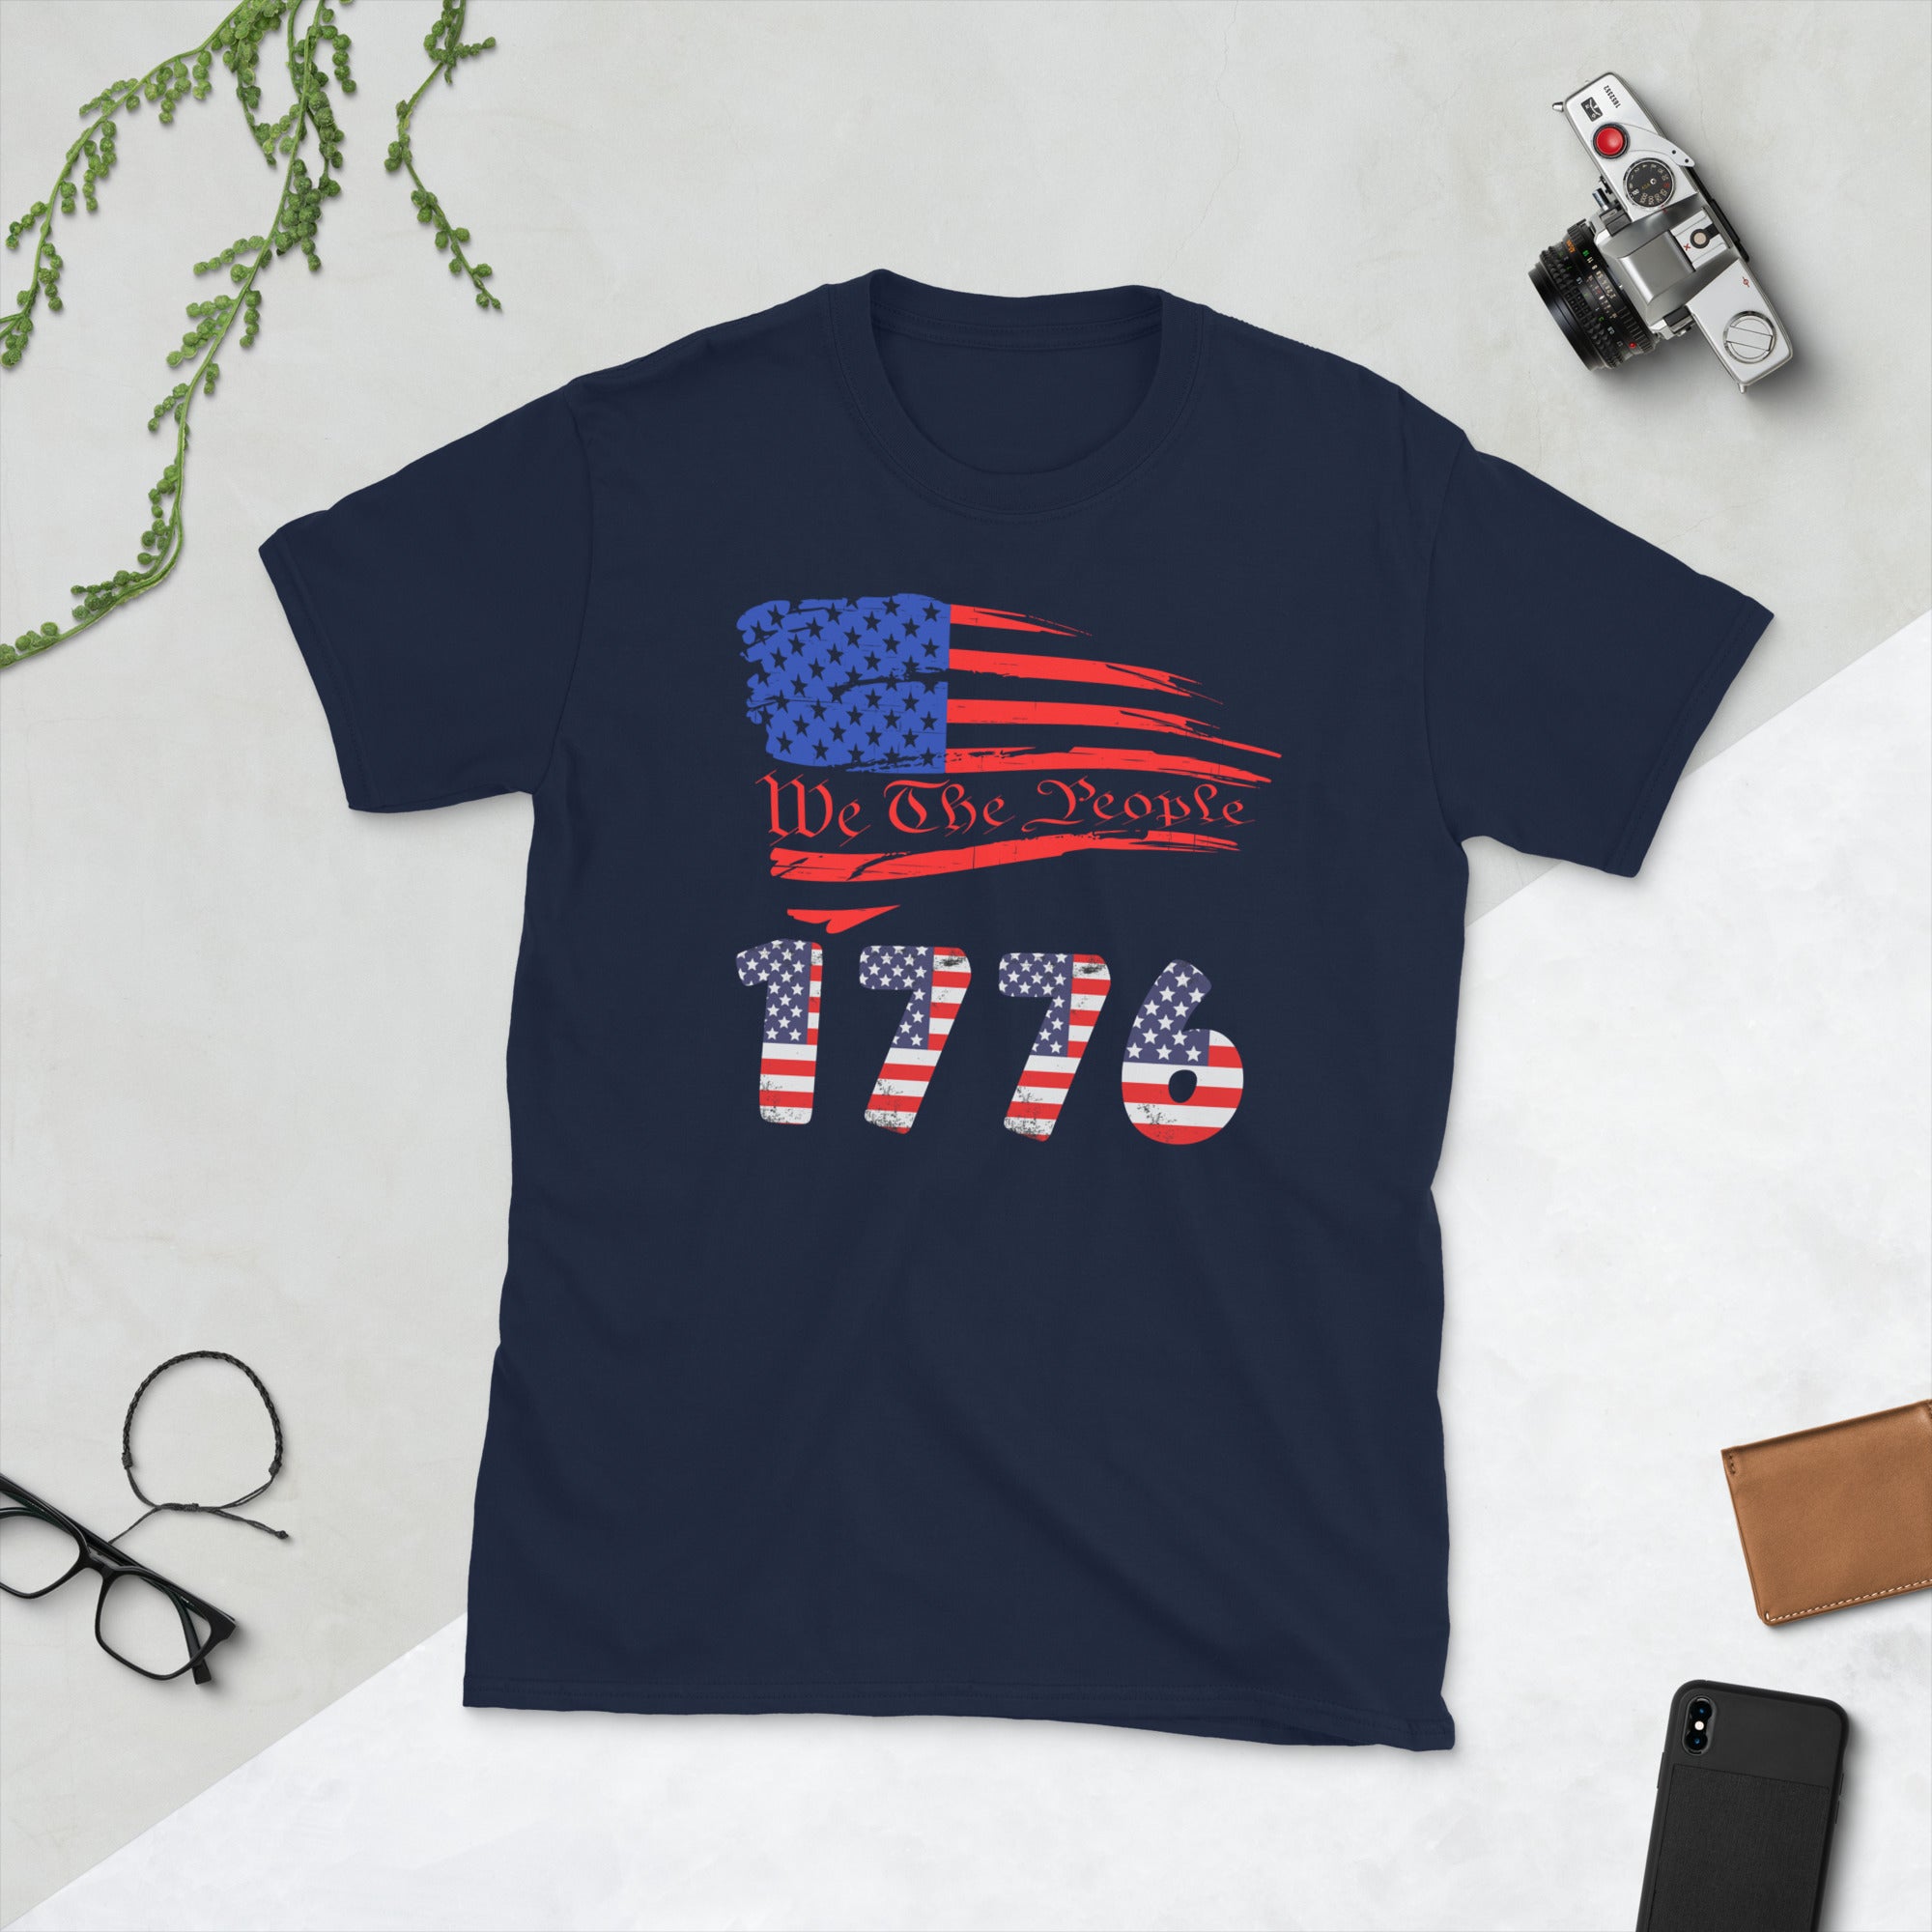 We The People Shirt, 1776 Shirt, Vintage USA American Flag, Patriotic Gifts, We The People Are Pissed Off, Freedom Shirt, Patriot Tee - Madeinsea©